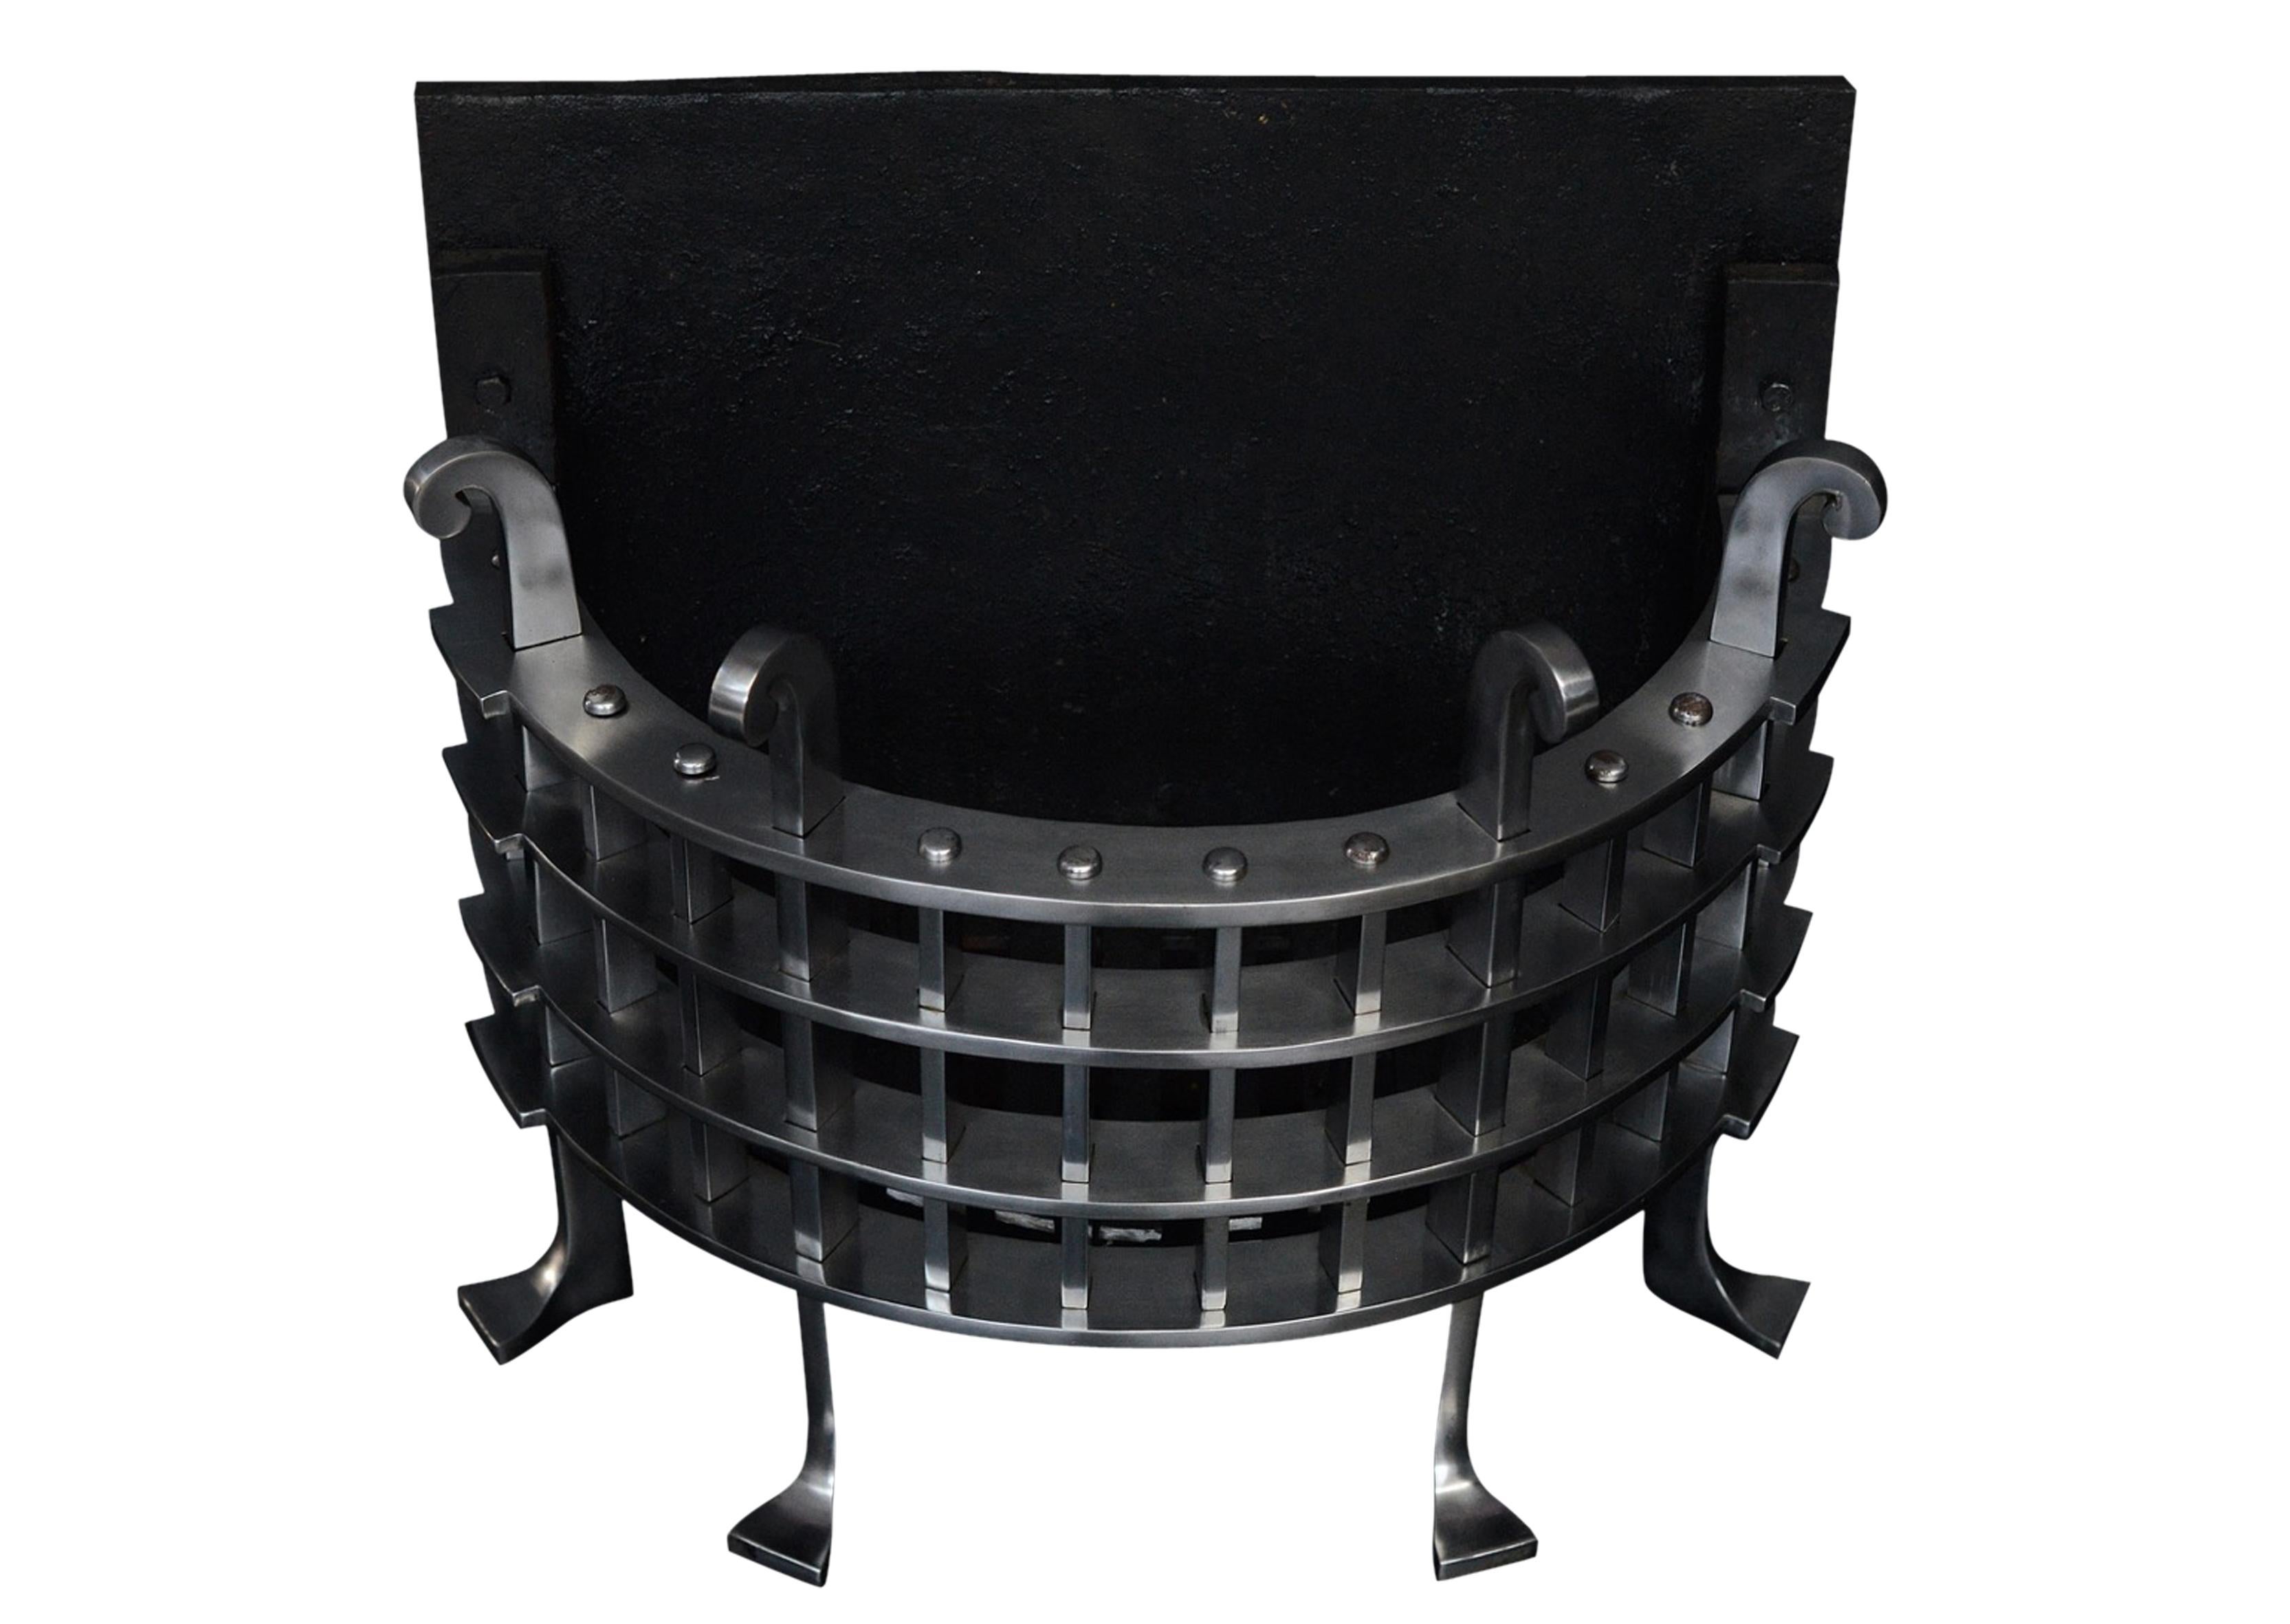 An unusual English half round wrought iron fire grate with portcullis style grill, upright bars with feet and scrolls to top. A copy of a mid-19th century original. N.B. May be subject to an extended lead time.

Width at front: 600 mm / 23 5/8